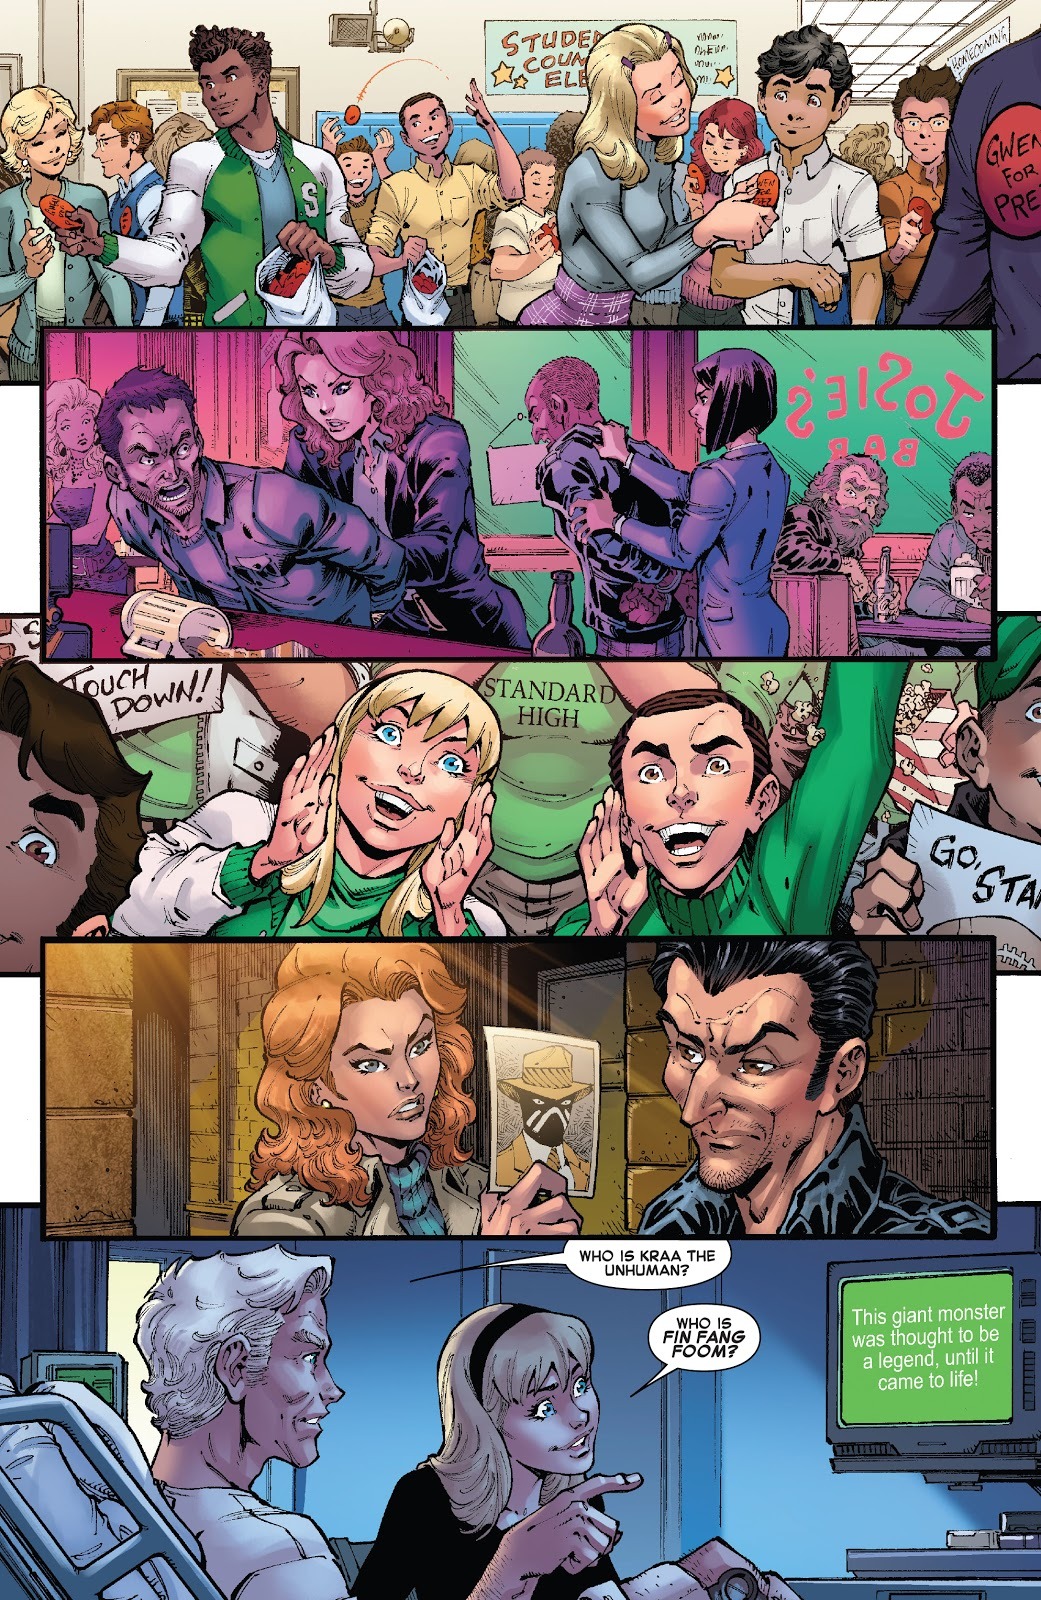 Hellz Yeah, Spider-Man: The Web Wielding Avenger — Gwen Stacy #2 Shit dude…can't we get a